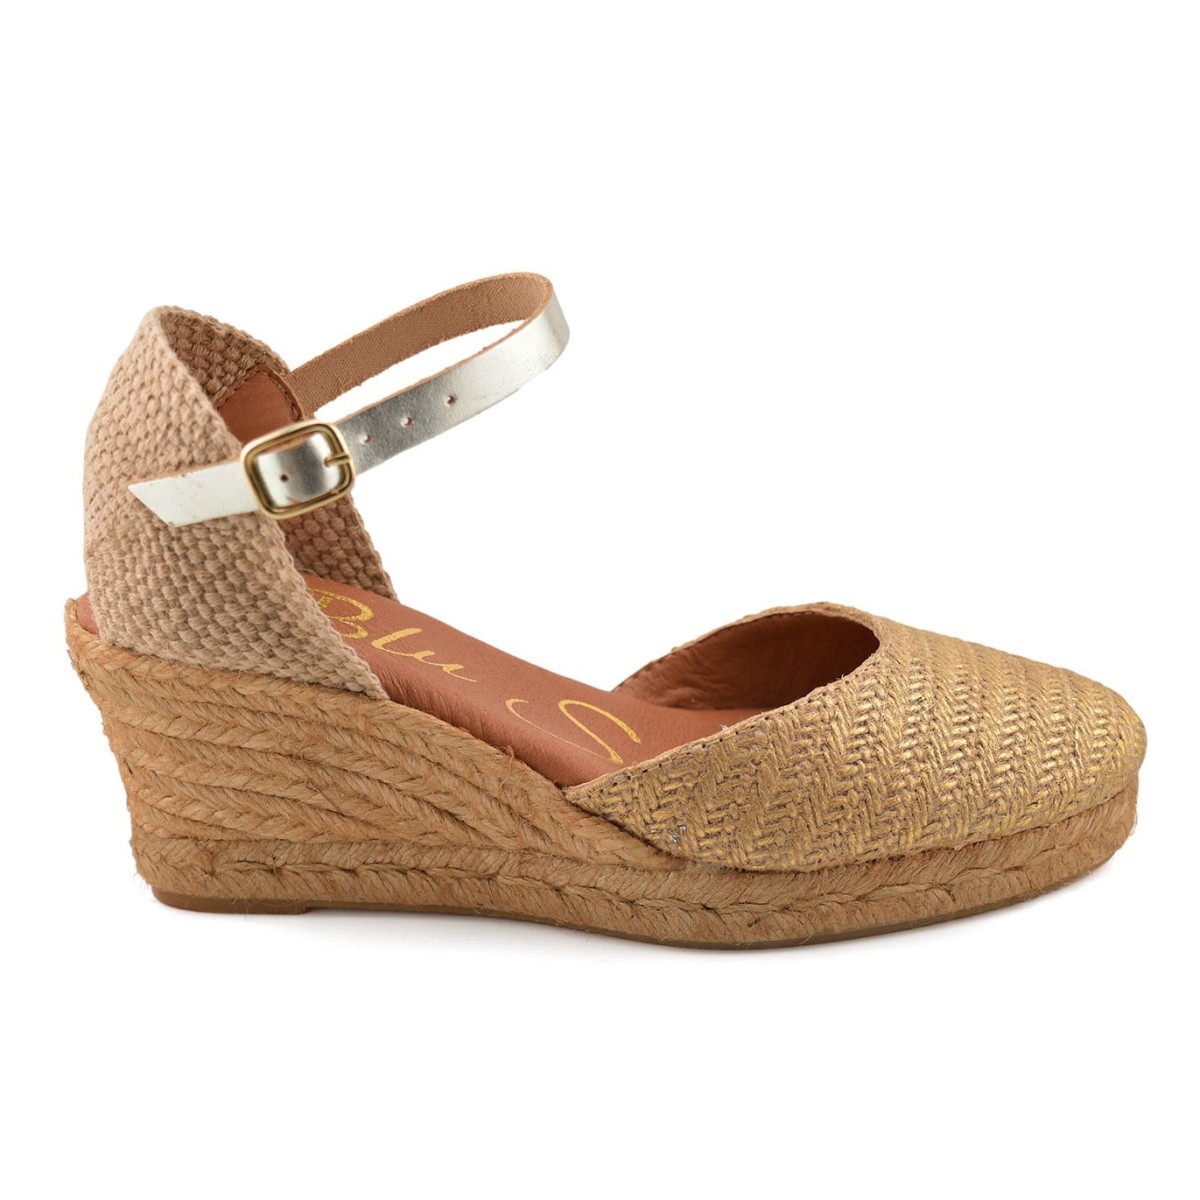 Golden espadrilles in leather and jute by BluSandal